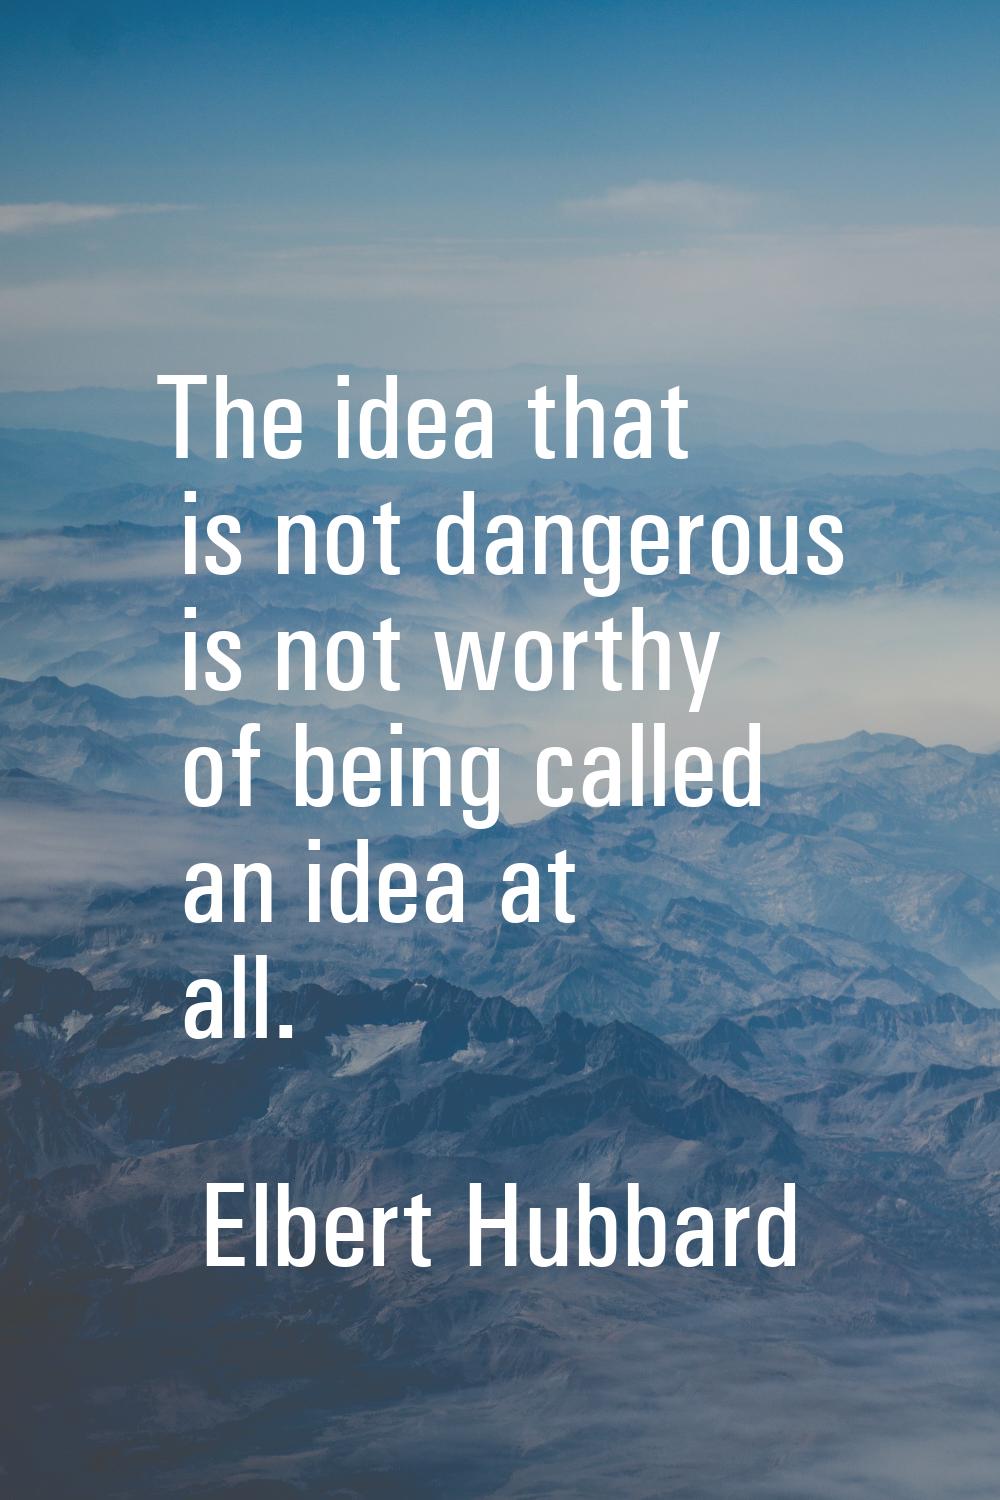 The idea that is not dangerous is not worthy of being called an idea at all.